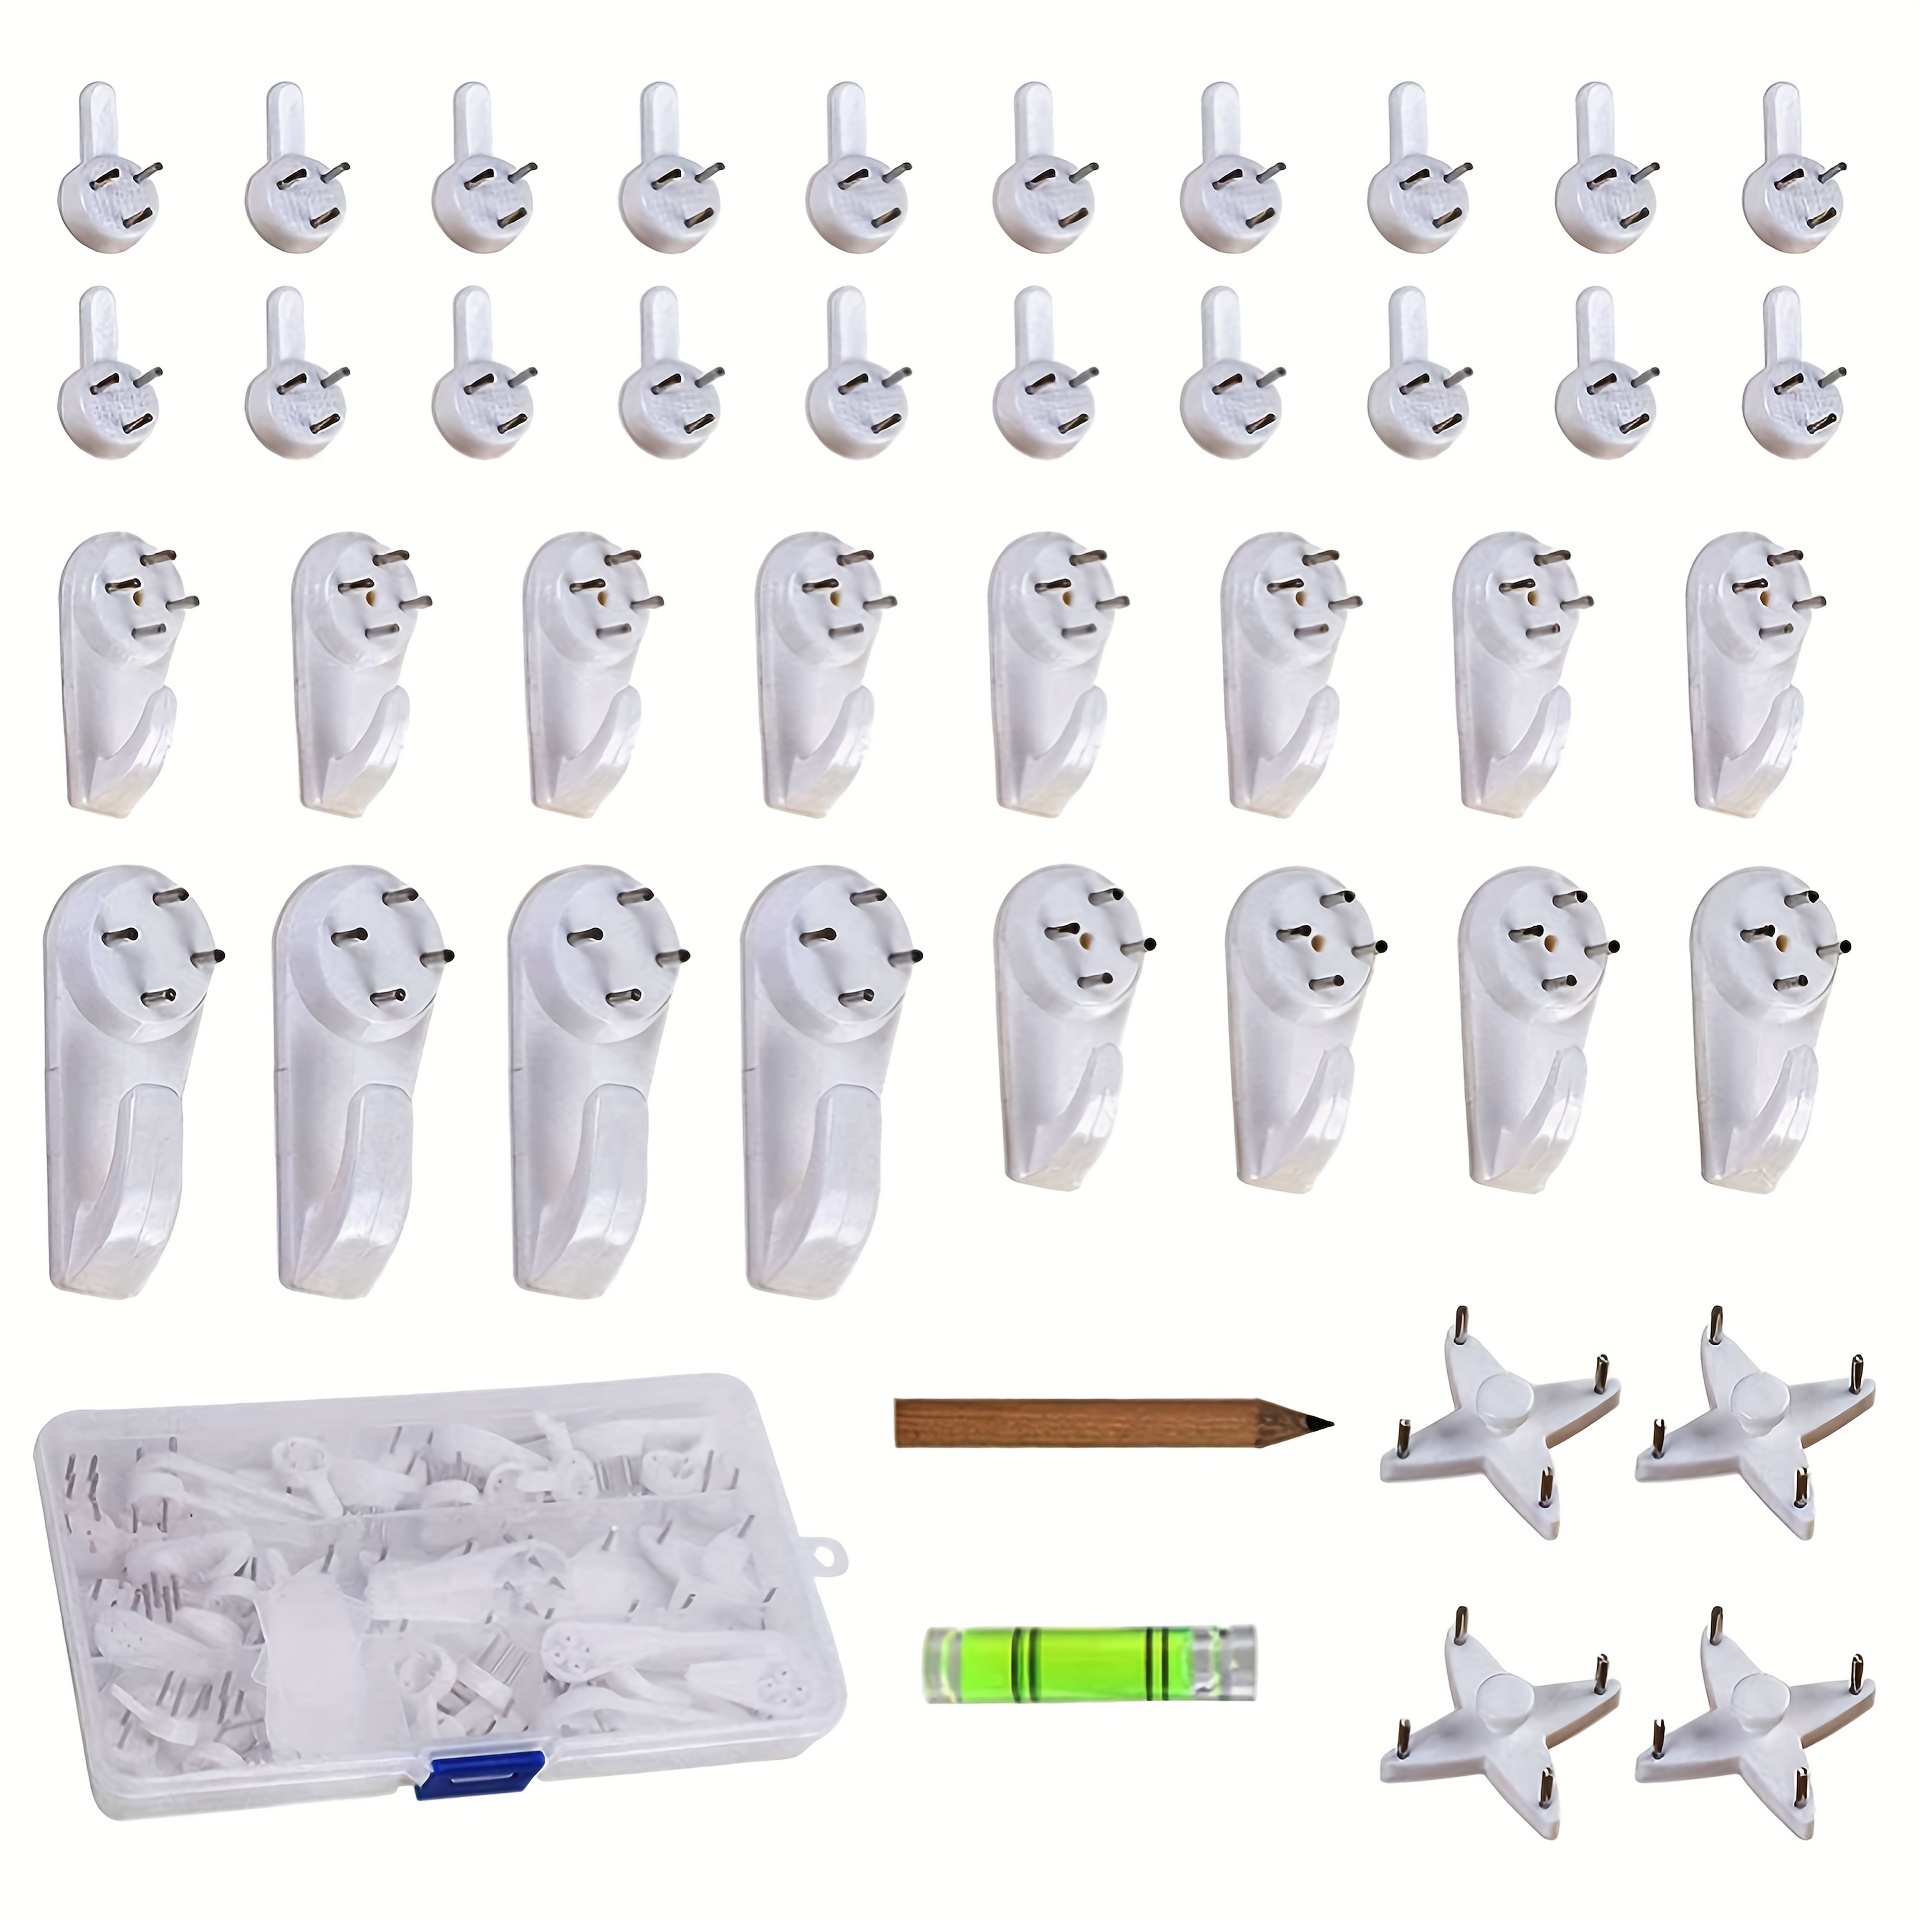 40pcs Picture Hangers Without Nails, No Damage Wall Hangers For